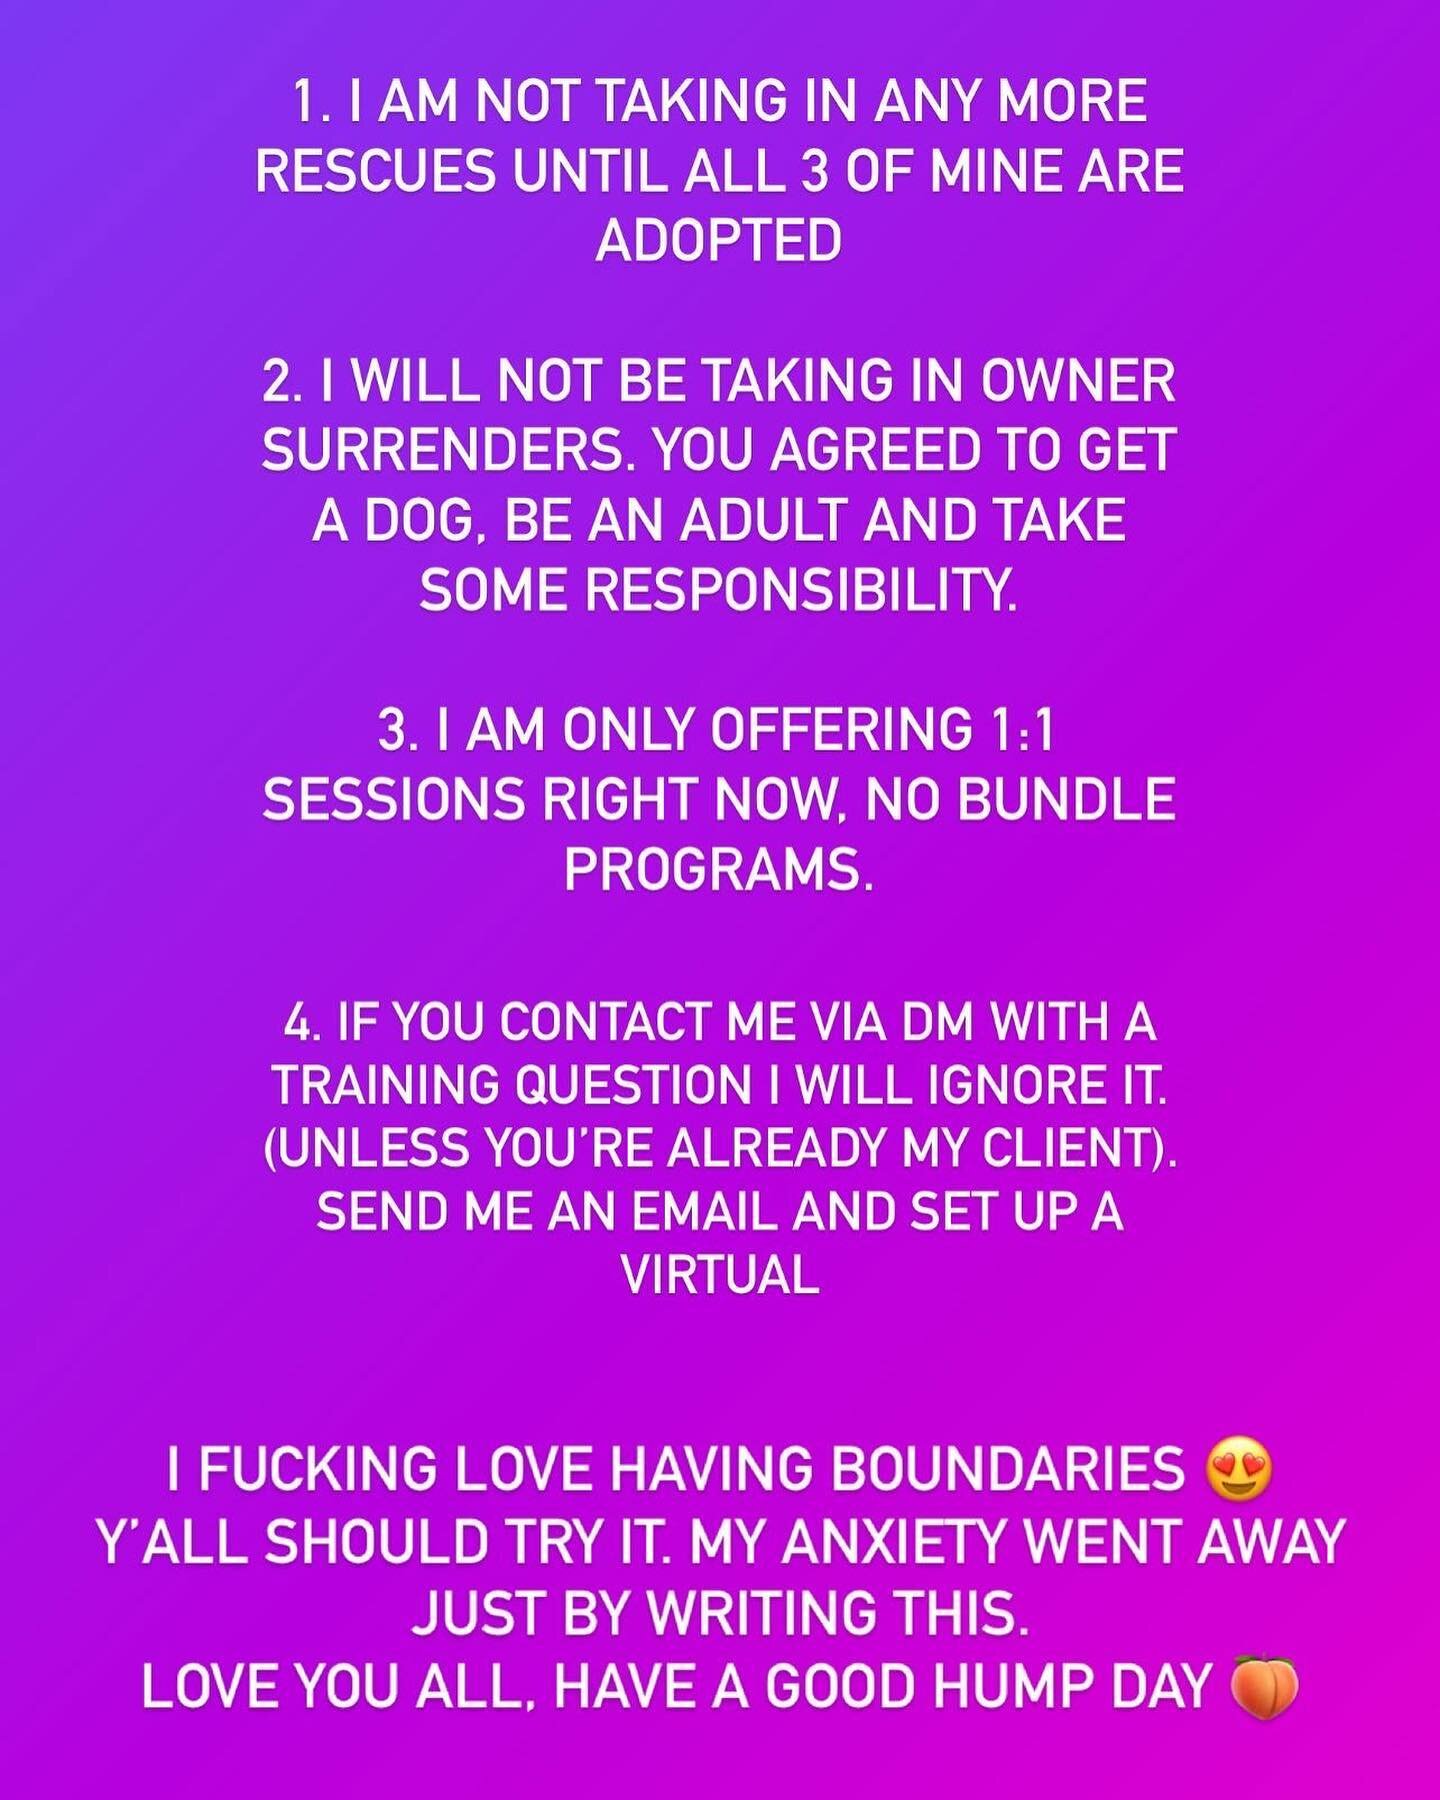 ‼️UPDATES EFFECTIVE IMMEDIATELY ‼️

Boundaries make you a better person. Boundaries make you a happier person.
Boundaries make people RESPECT you more.
Boundaries make your dog LOVE you more.
Boundaries will bring you peace, I promise.

Just some new